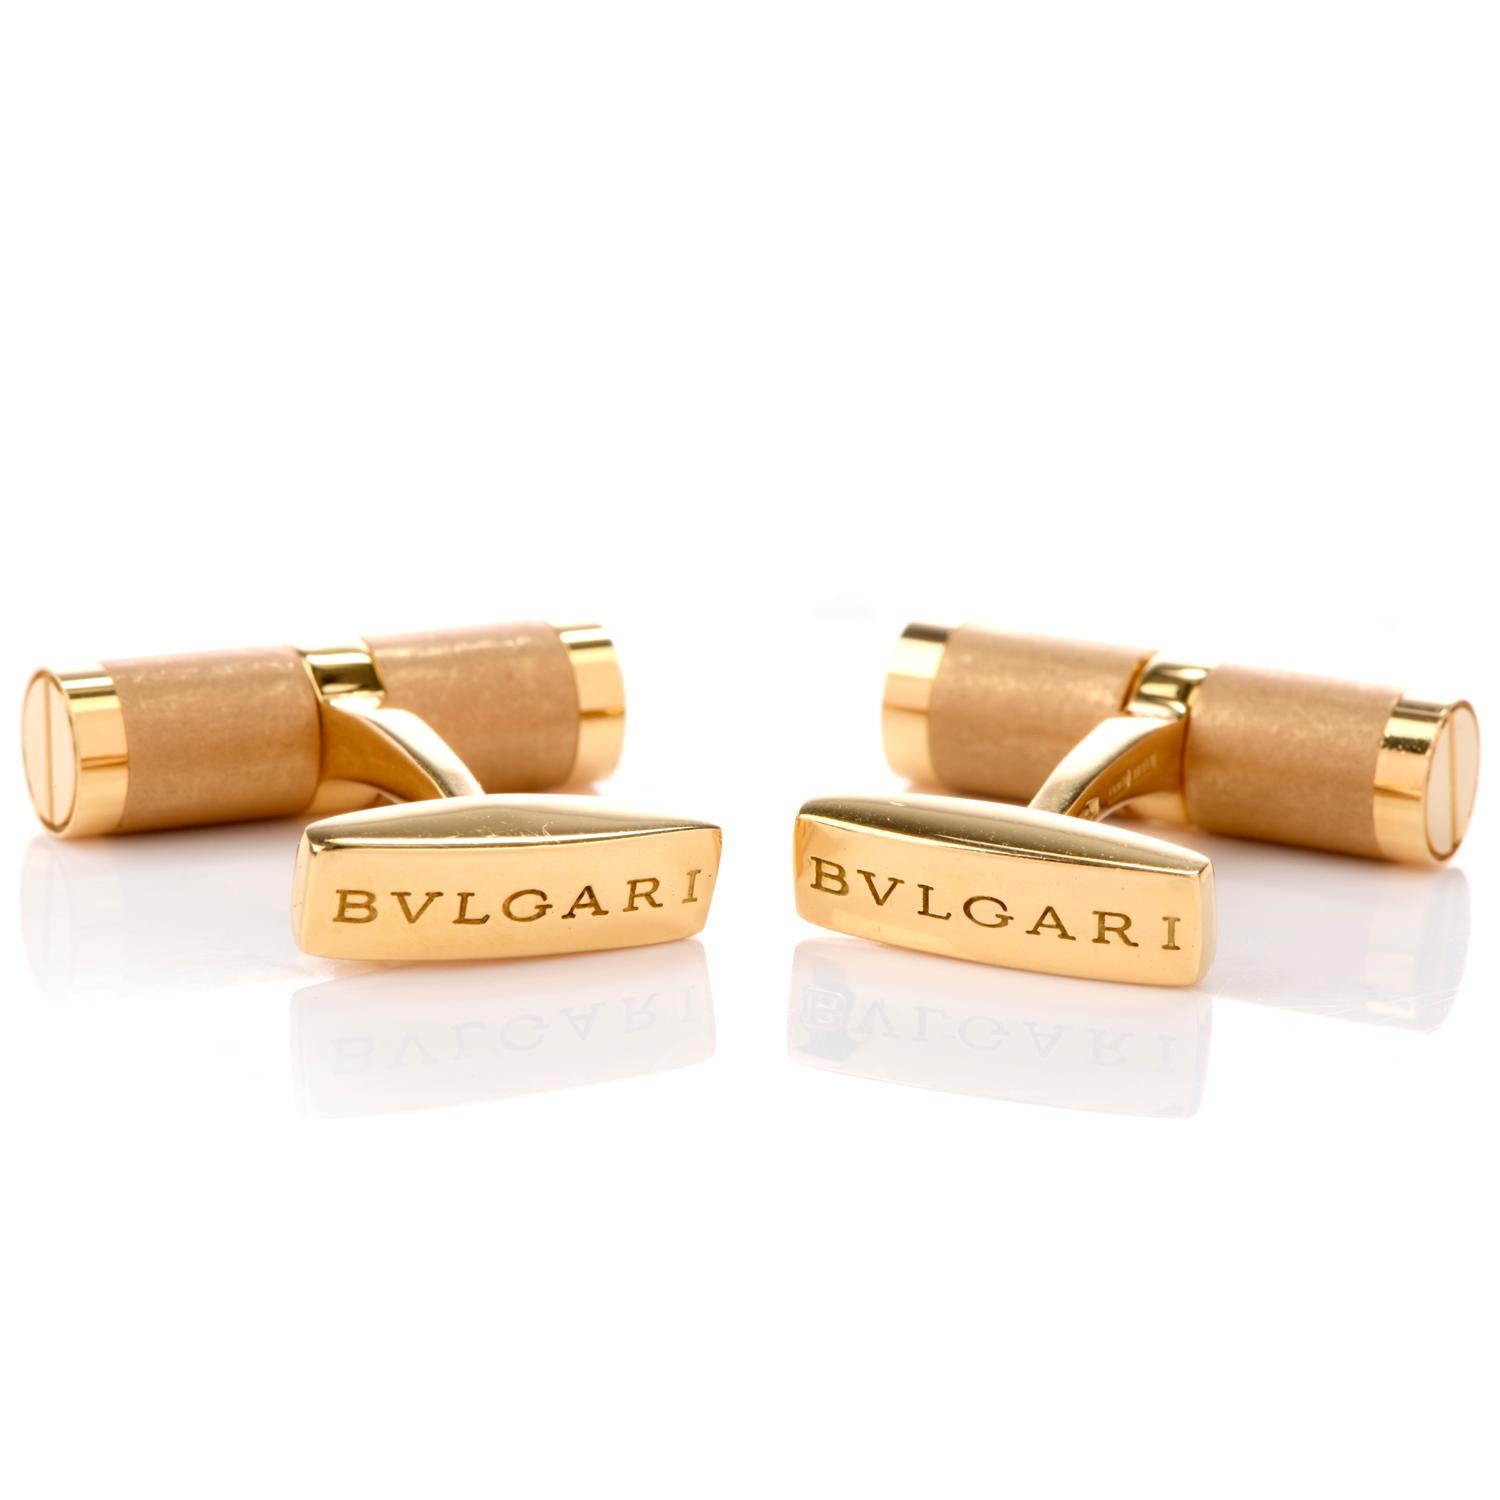 These collectable no longer in production Bvlgari cufflinks were inspired in a Dowel and Screw motif and crafted in 18 Karat gold.

An alternating satin and high polish finish adorn the pattern.

Measure appx. 6.26mm x 20.95mm.
Stamped Bvlgari, 750